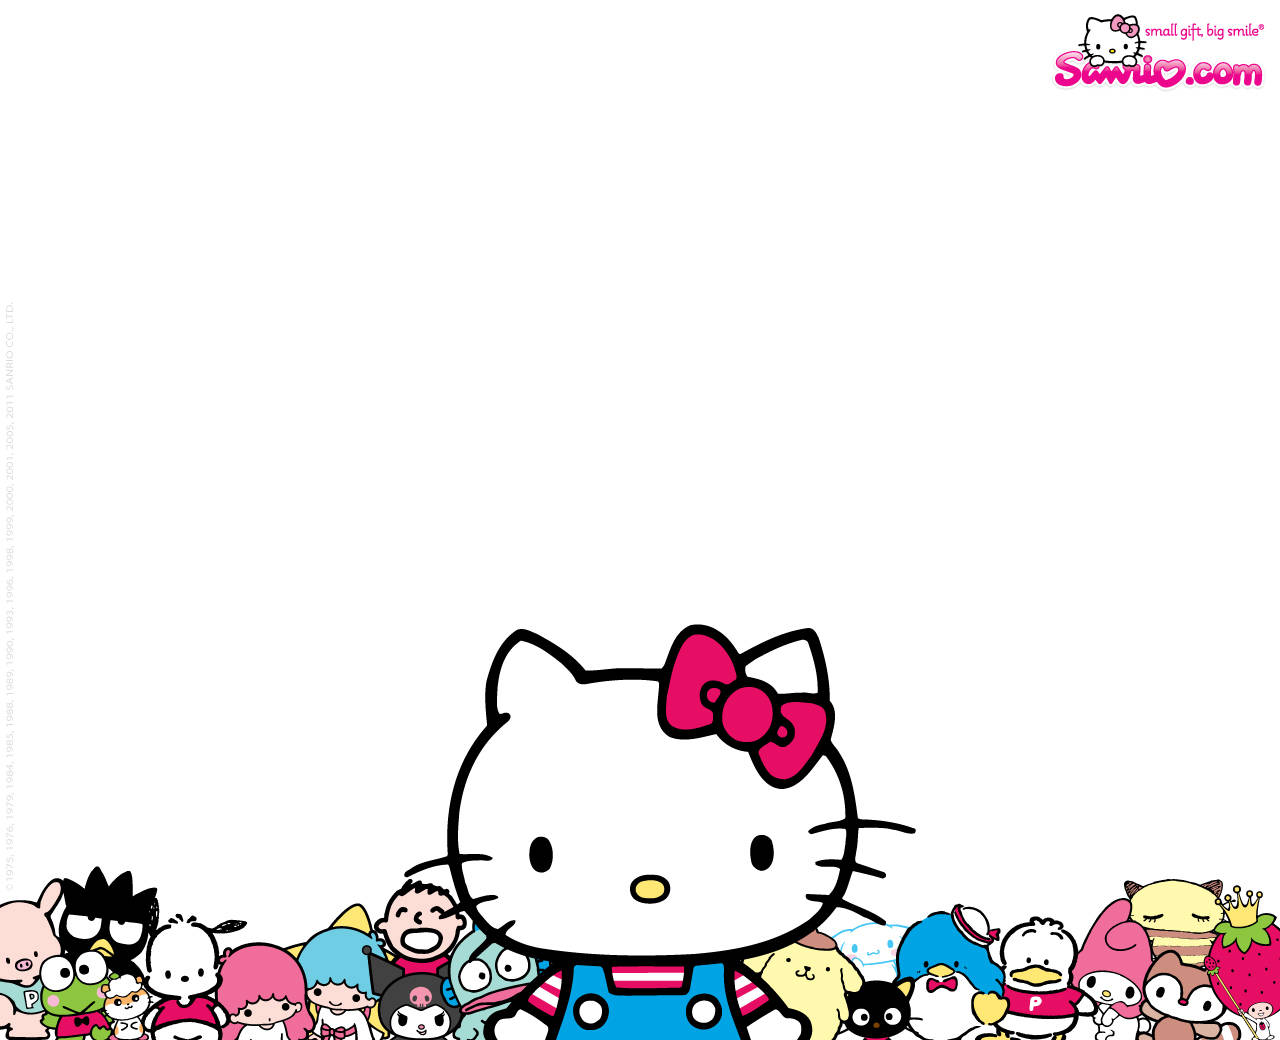 Sanrio Characters In White Background